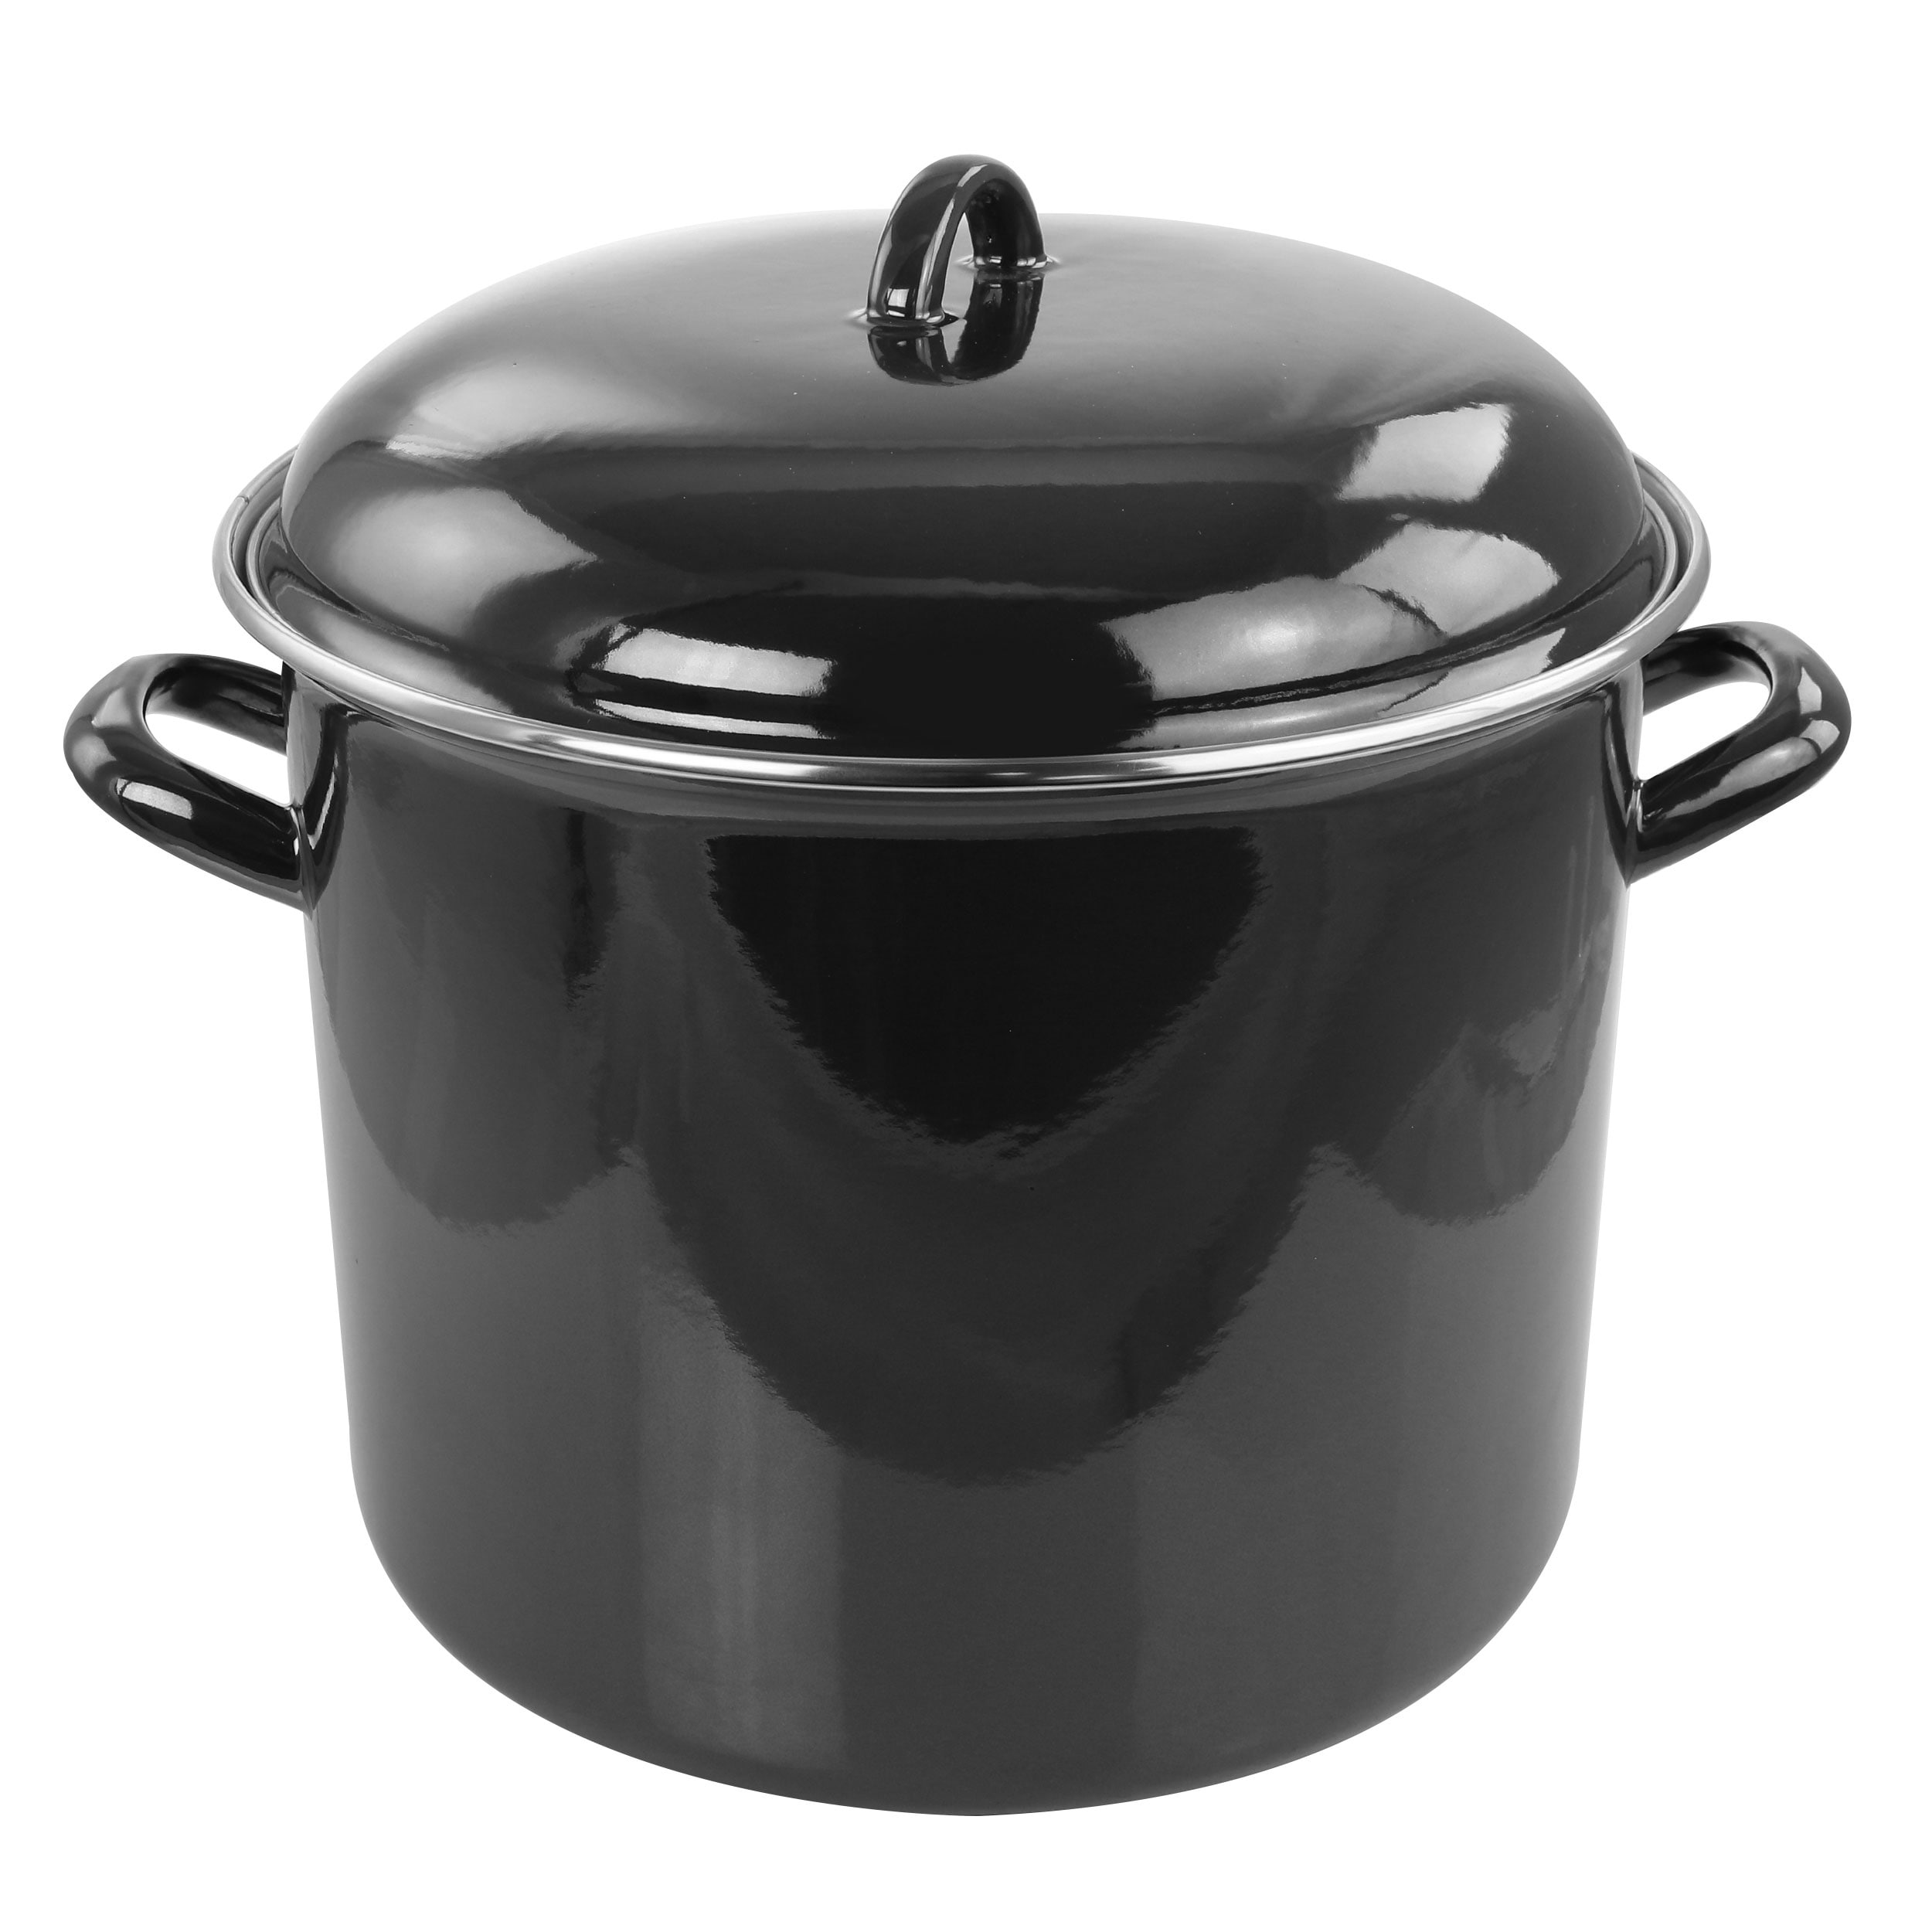 Gibson Home 12 Quart Enamel on Steel Stock Pot with Lid - Black